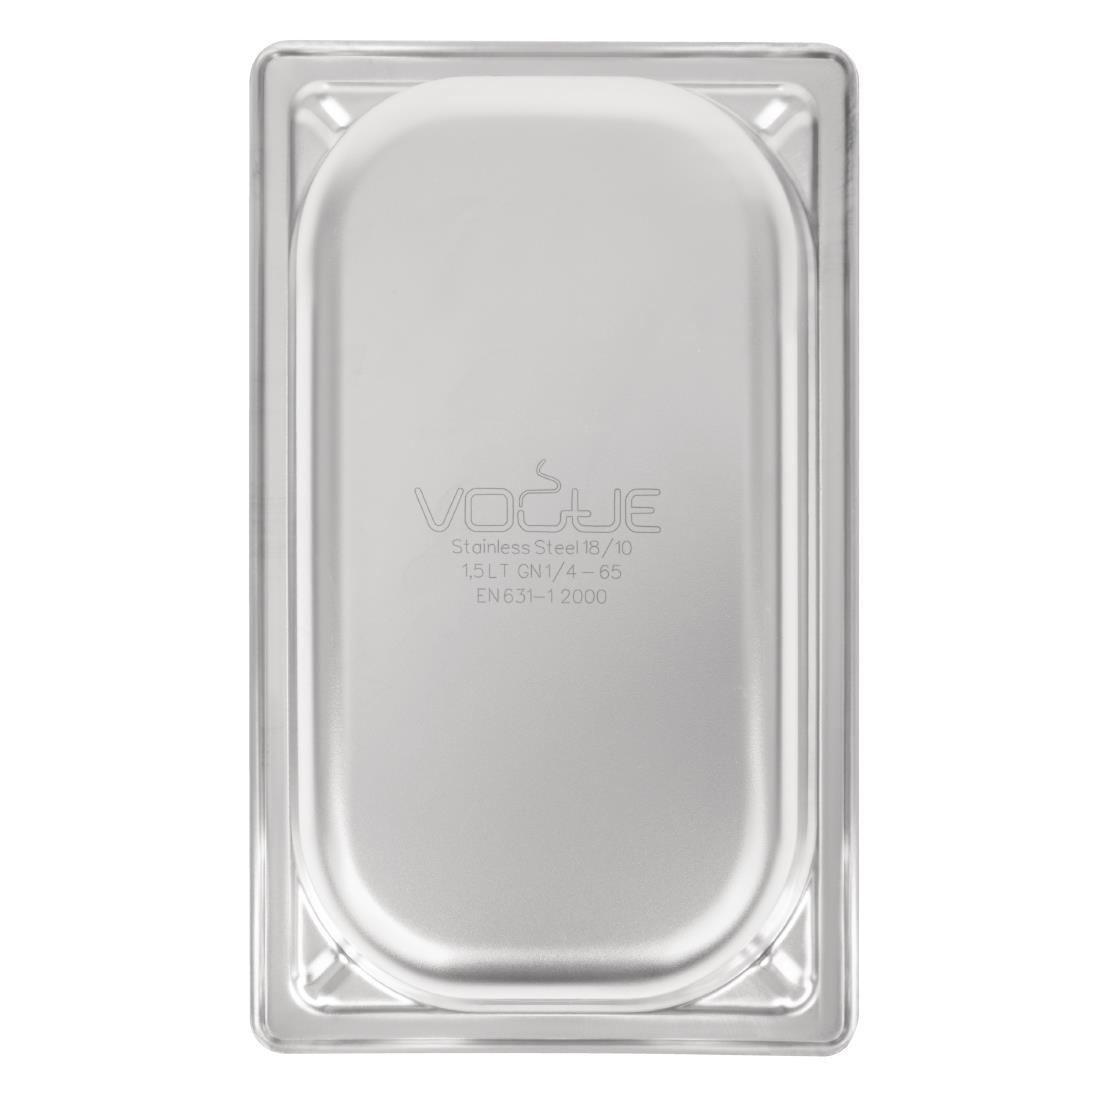 Vogue Heavy Duty Stainless Steel 1/4 Gastronorm Pan 65mm - DW446  - 6